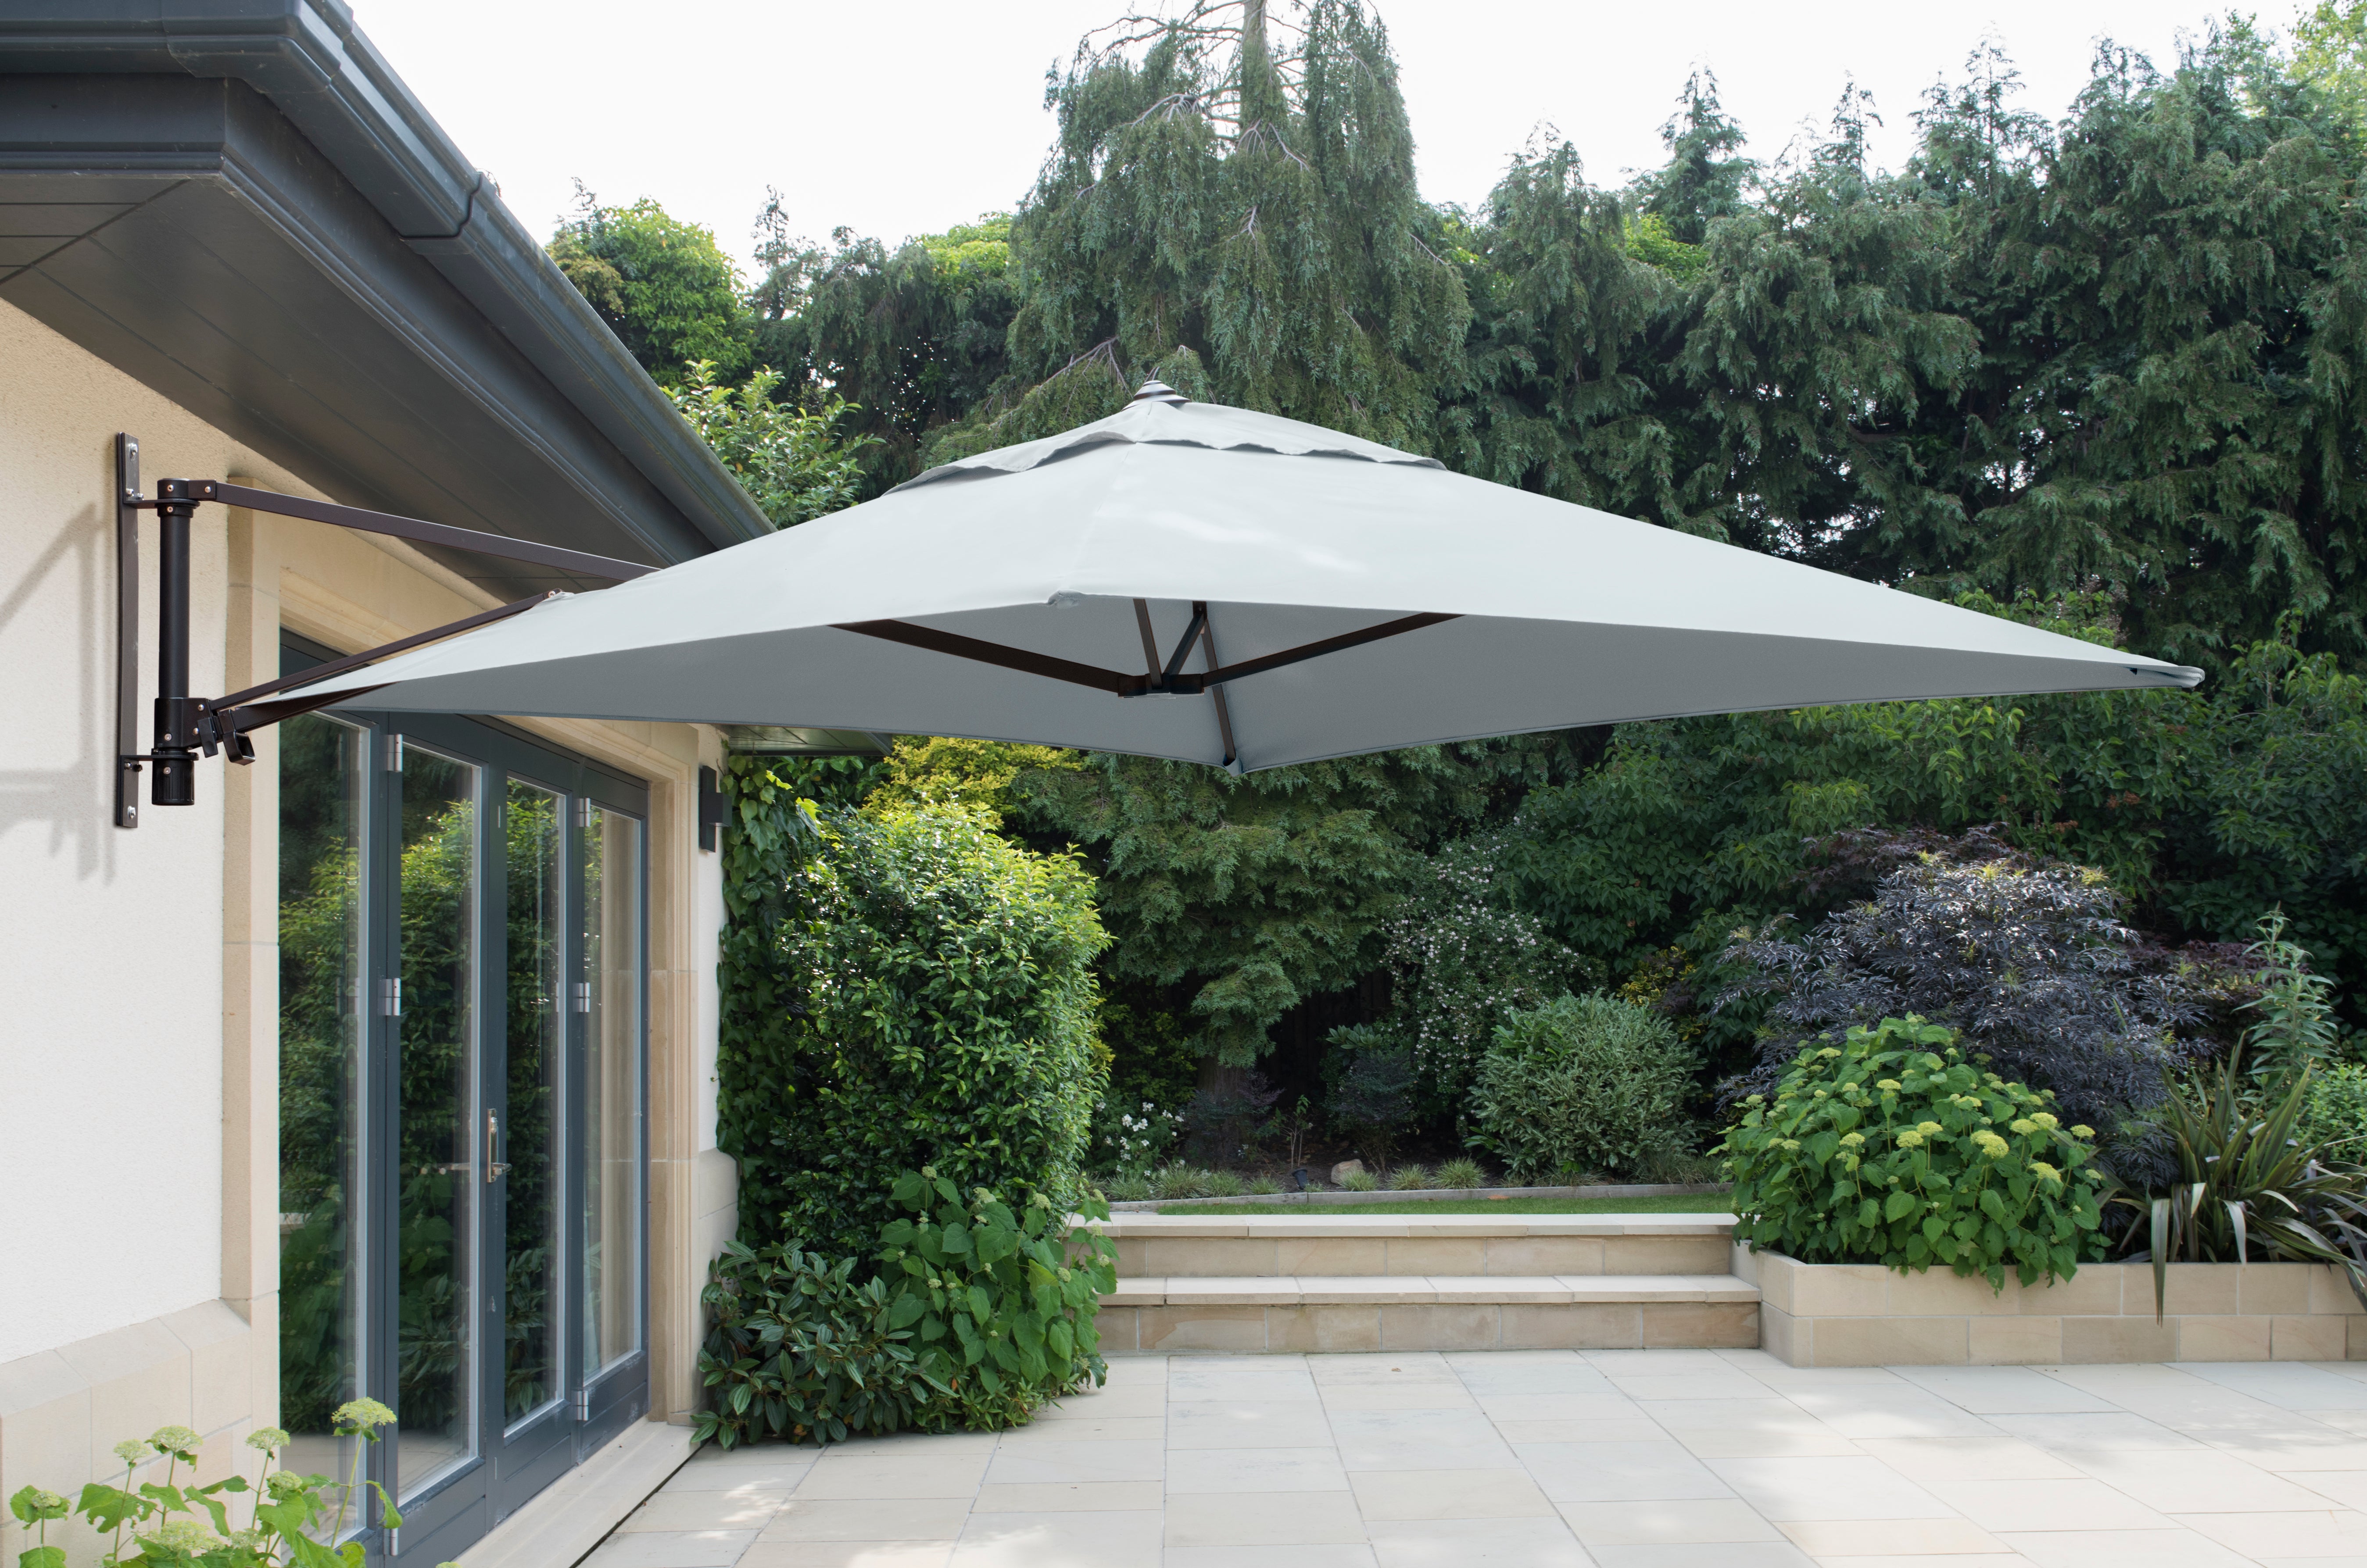 Norfolk Leisure Wall Mounted Cantilever Parasol Grey inc Cover